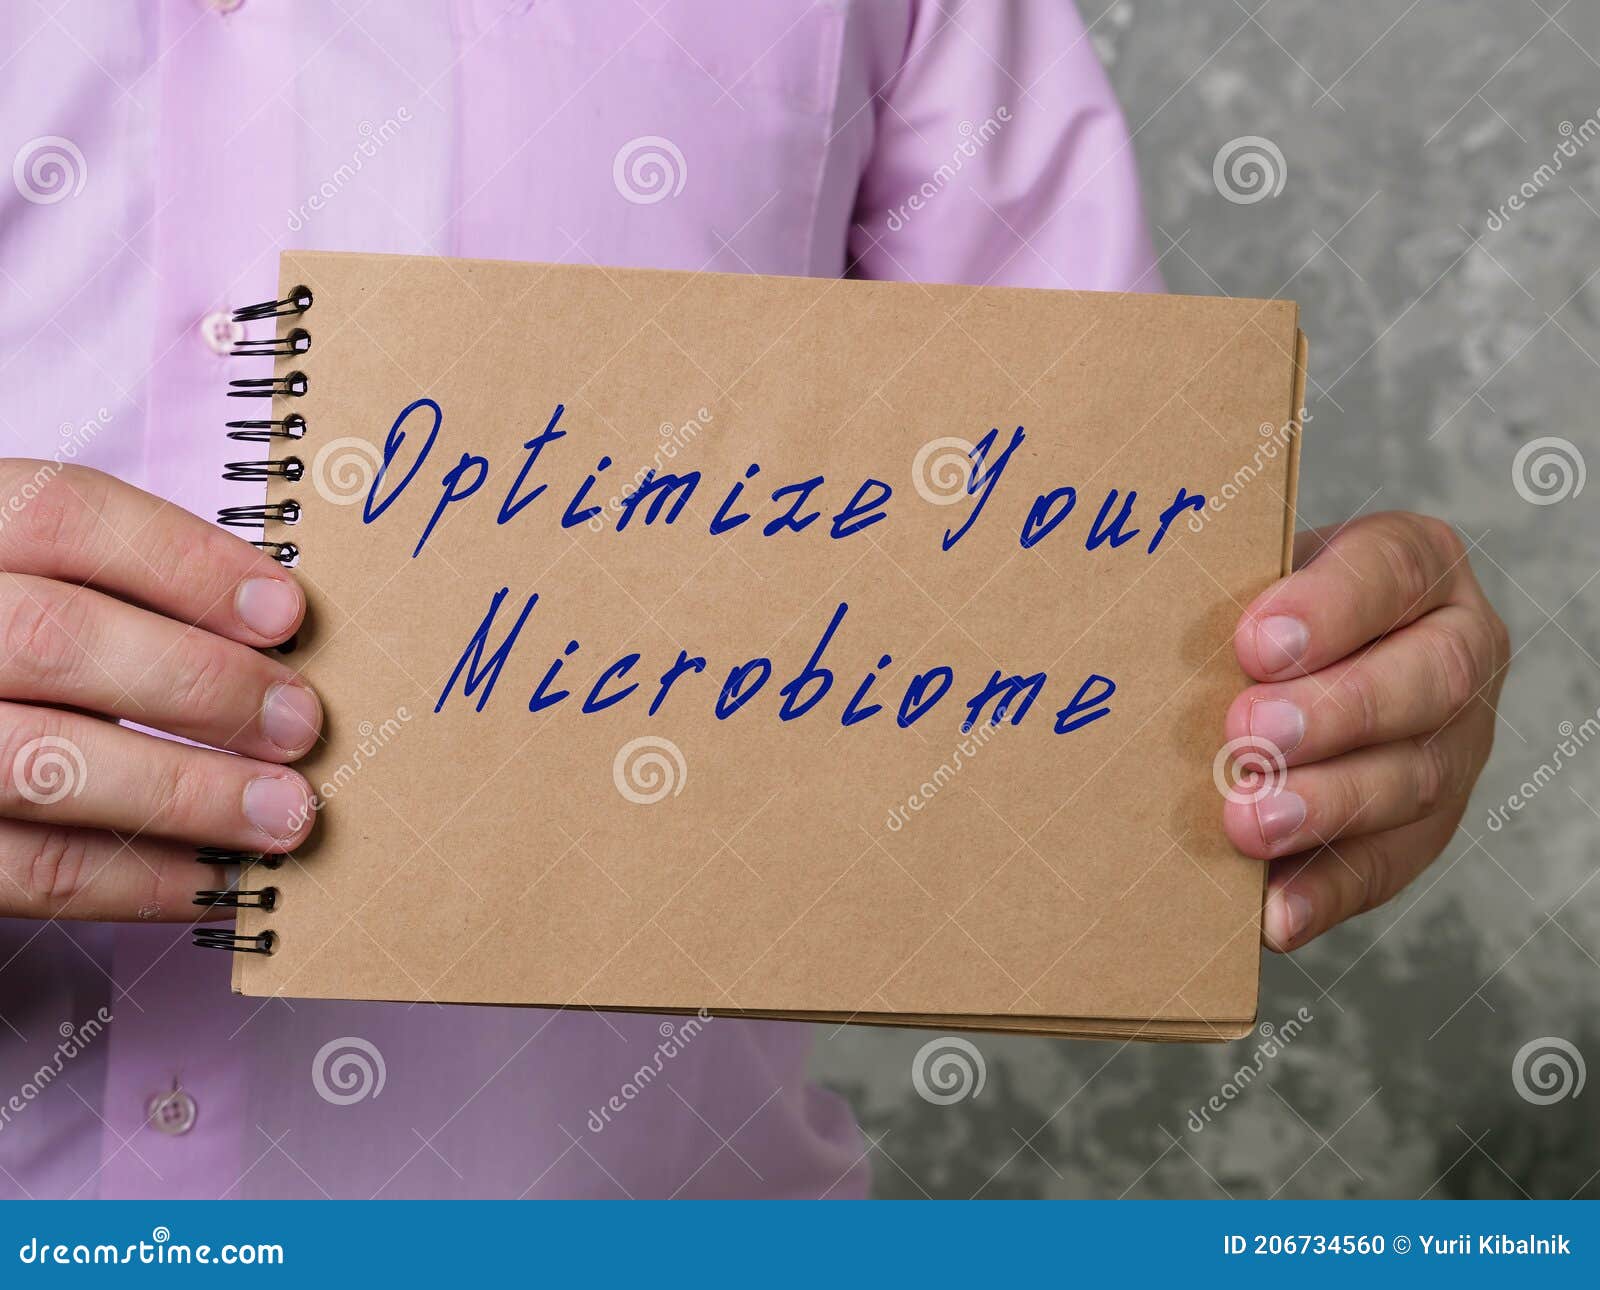 motivational concept about optimize your microbiome with sign on the piece of paper